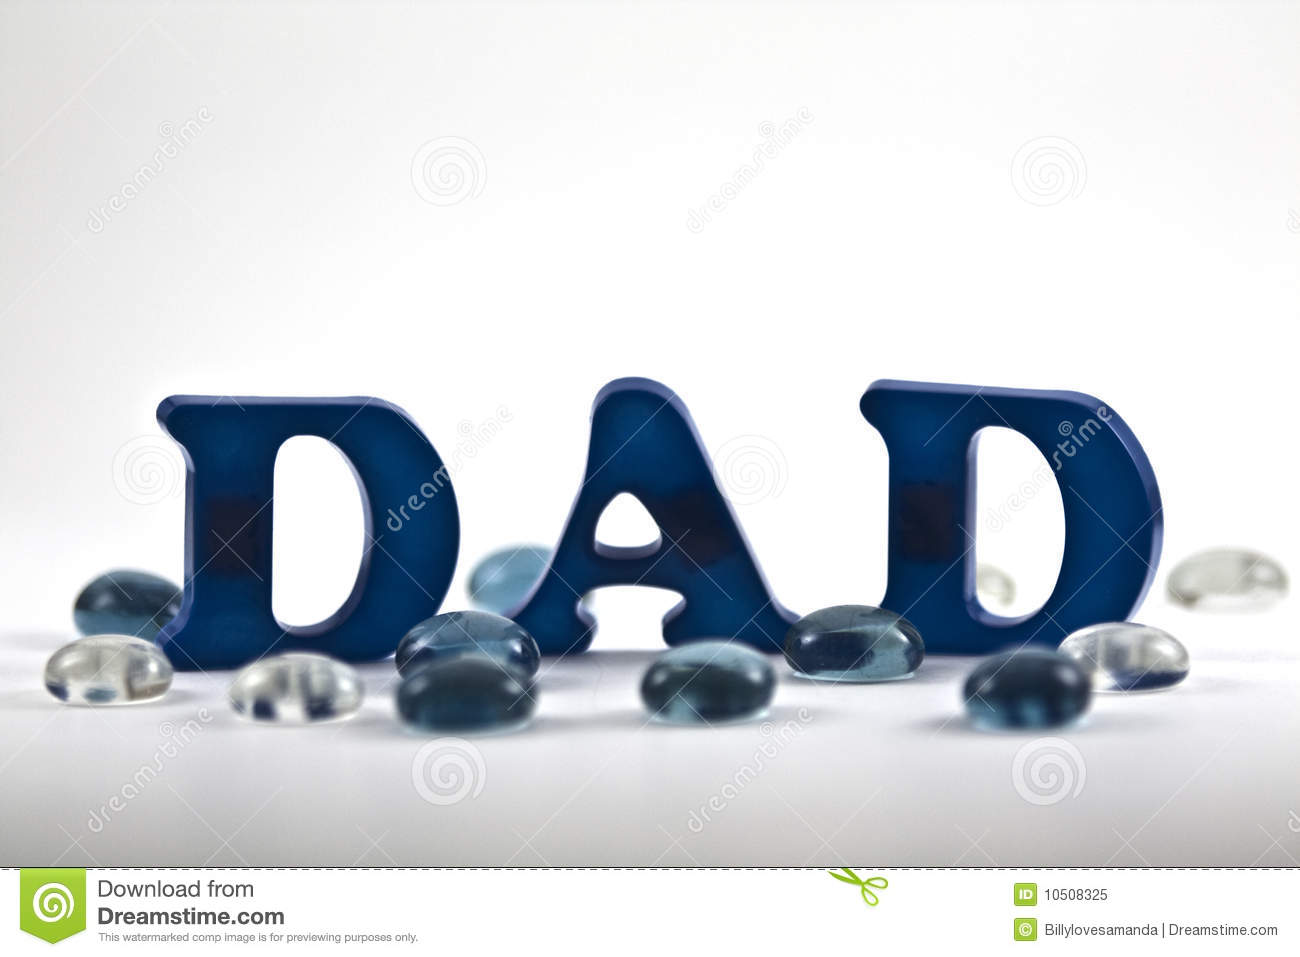 Blue Refrigerator Magnets Spelling Word Dad With Decorative Smooth